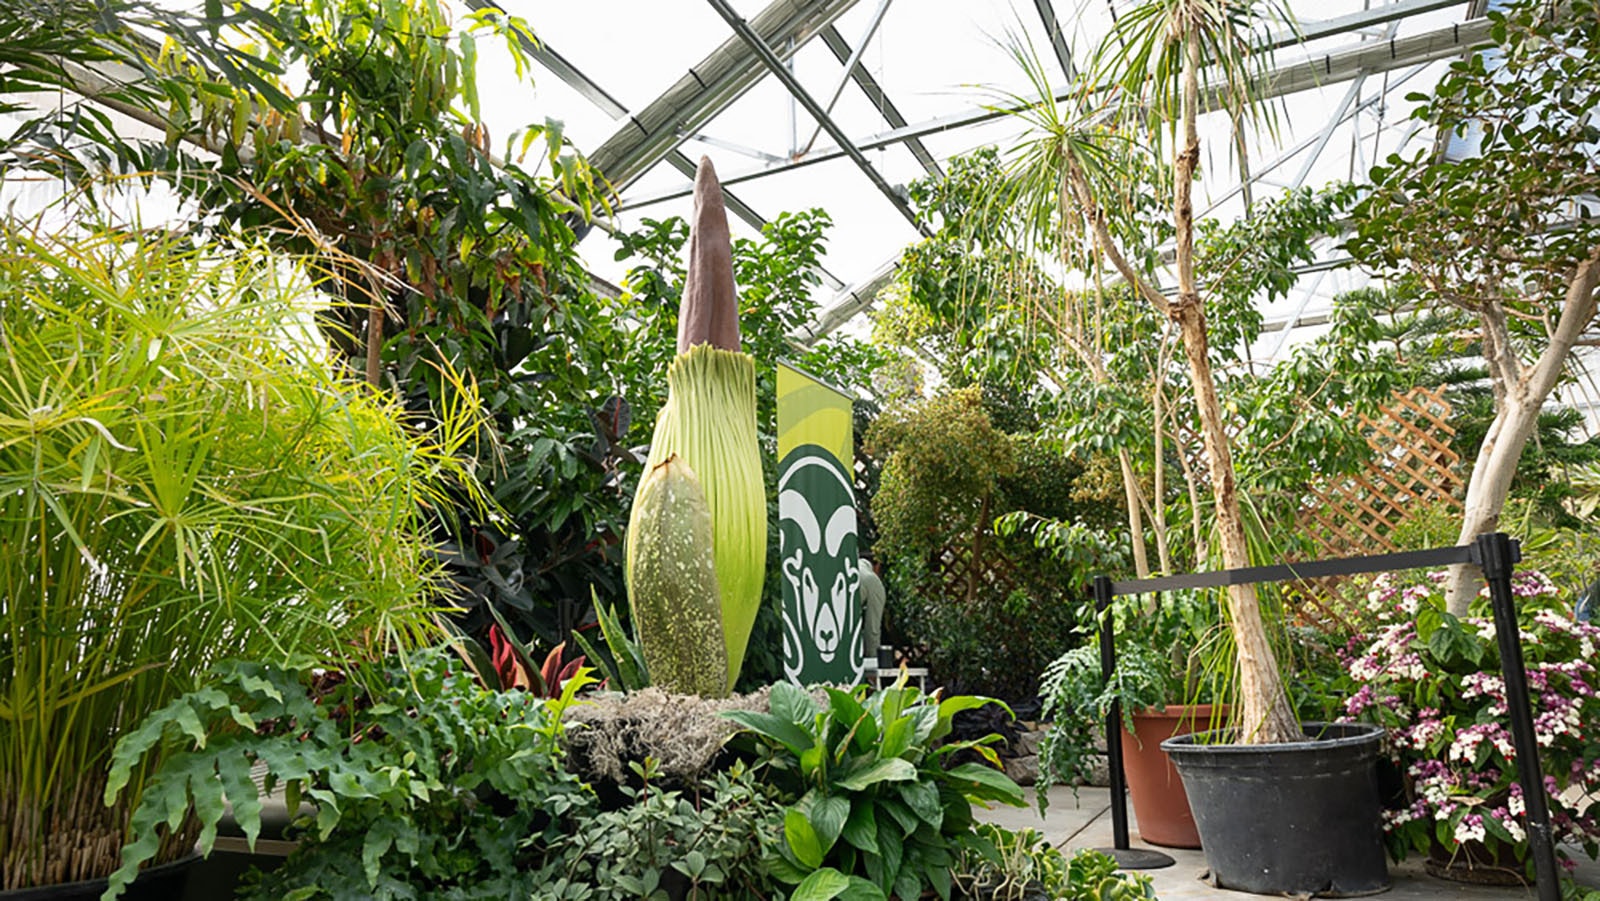 The folks at Colorado State University are excited for its corpse flower to bloom for the first time over the Memorial Day weekend.